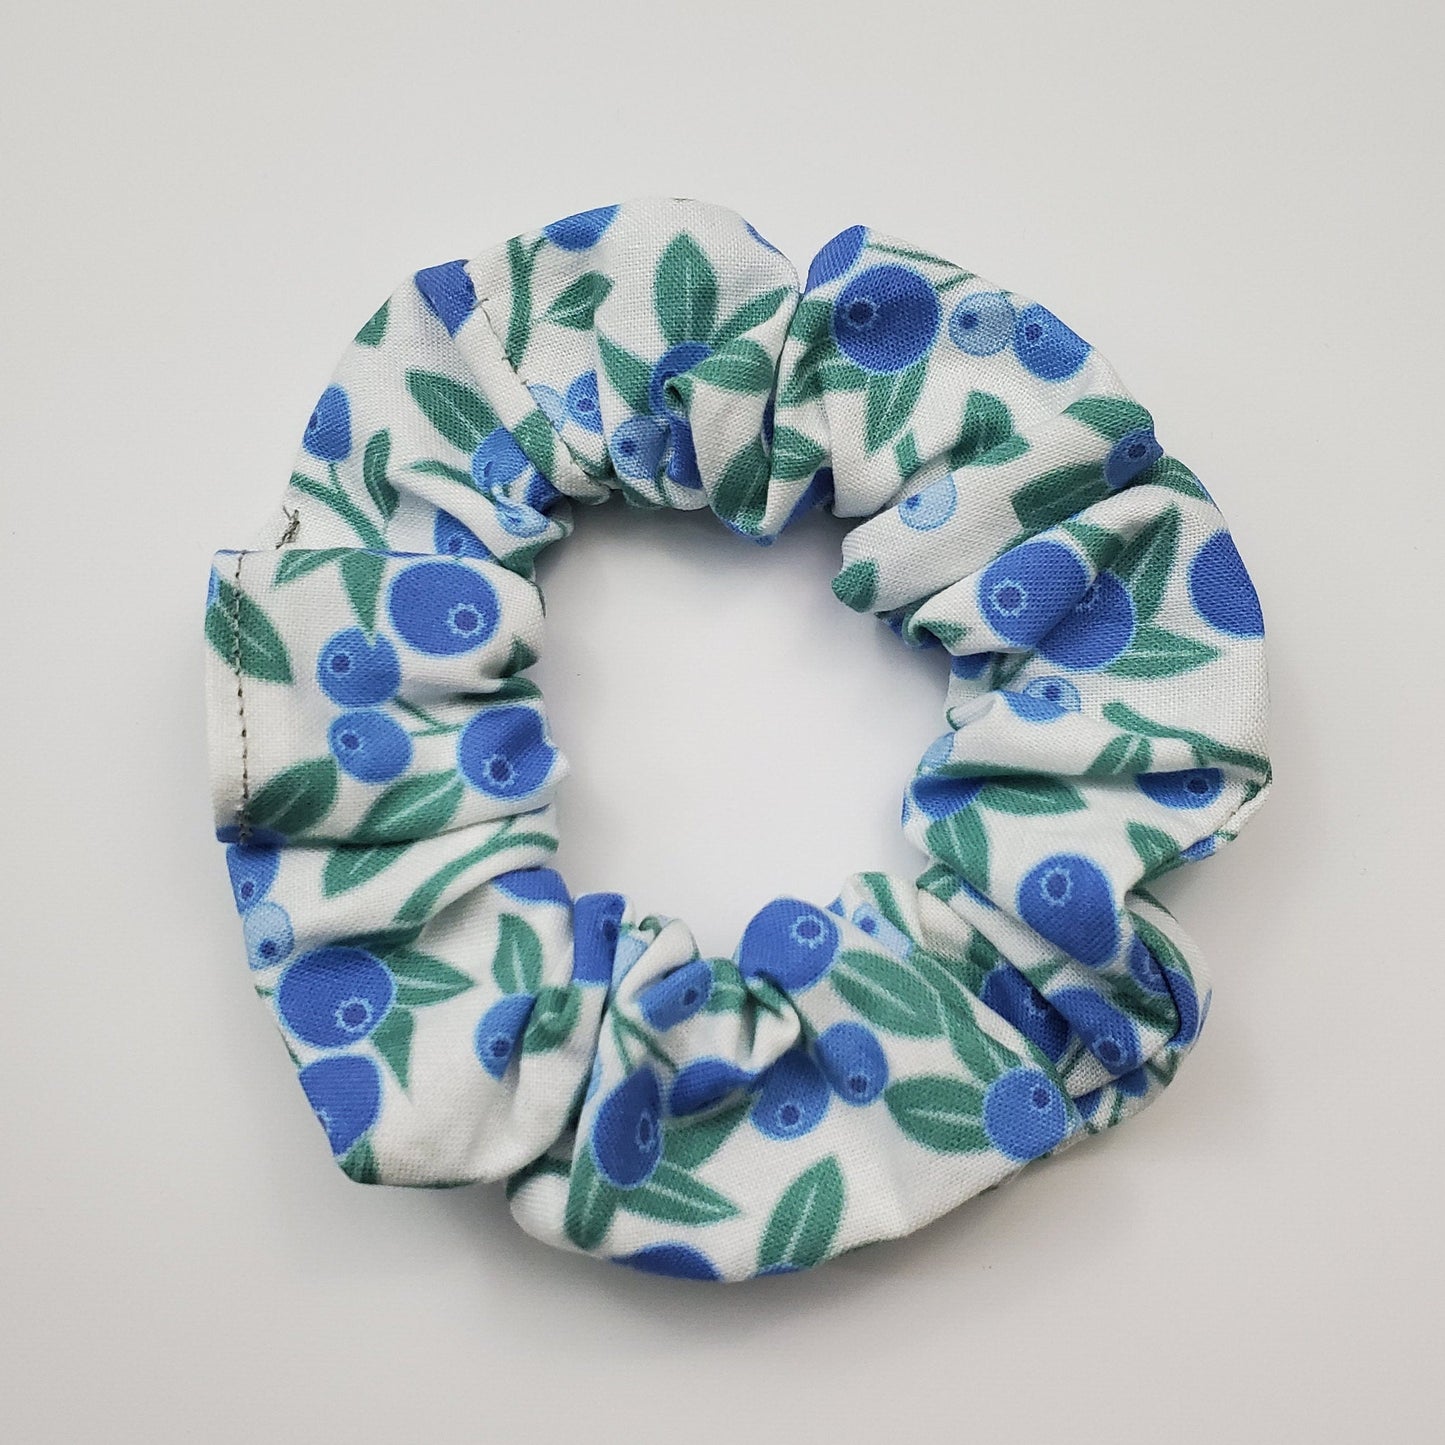 Blueberry print scrunchie - a white background fabric with solid color dark and light blue blueberries and green leaves.